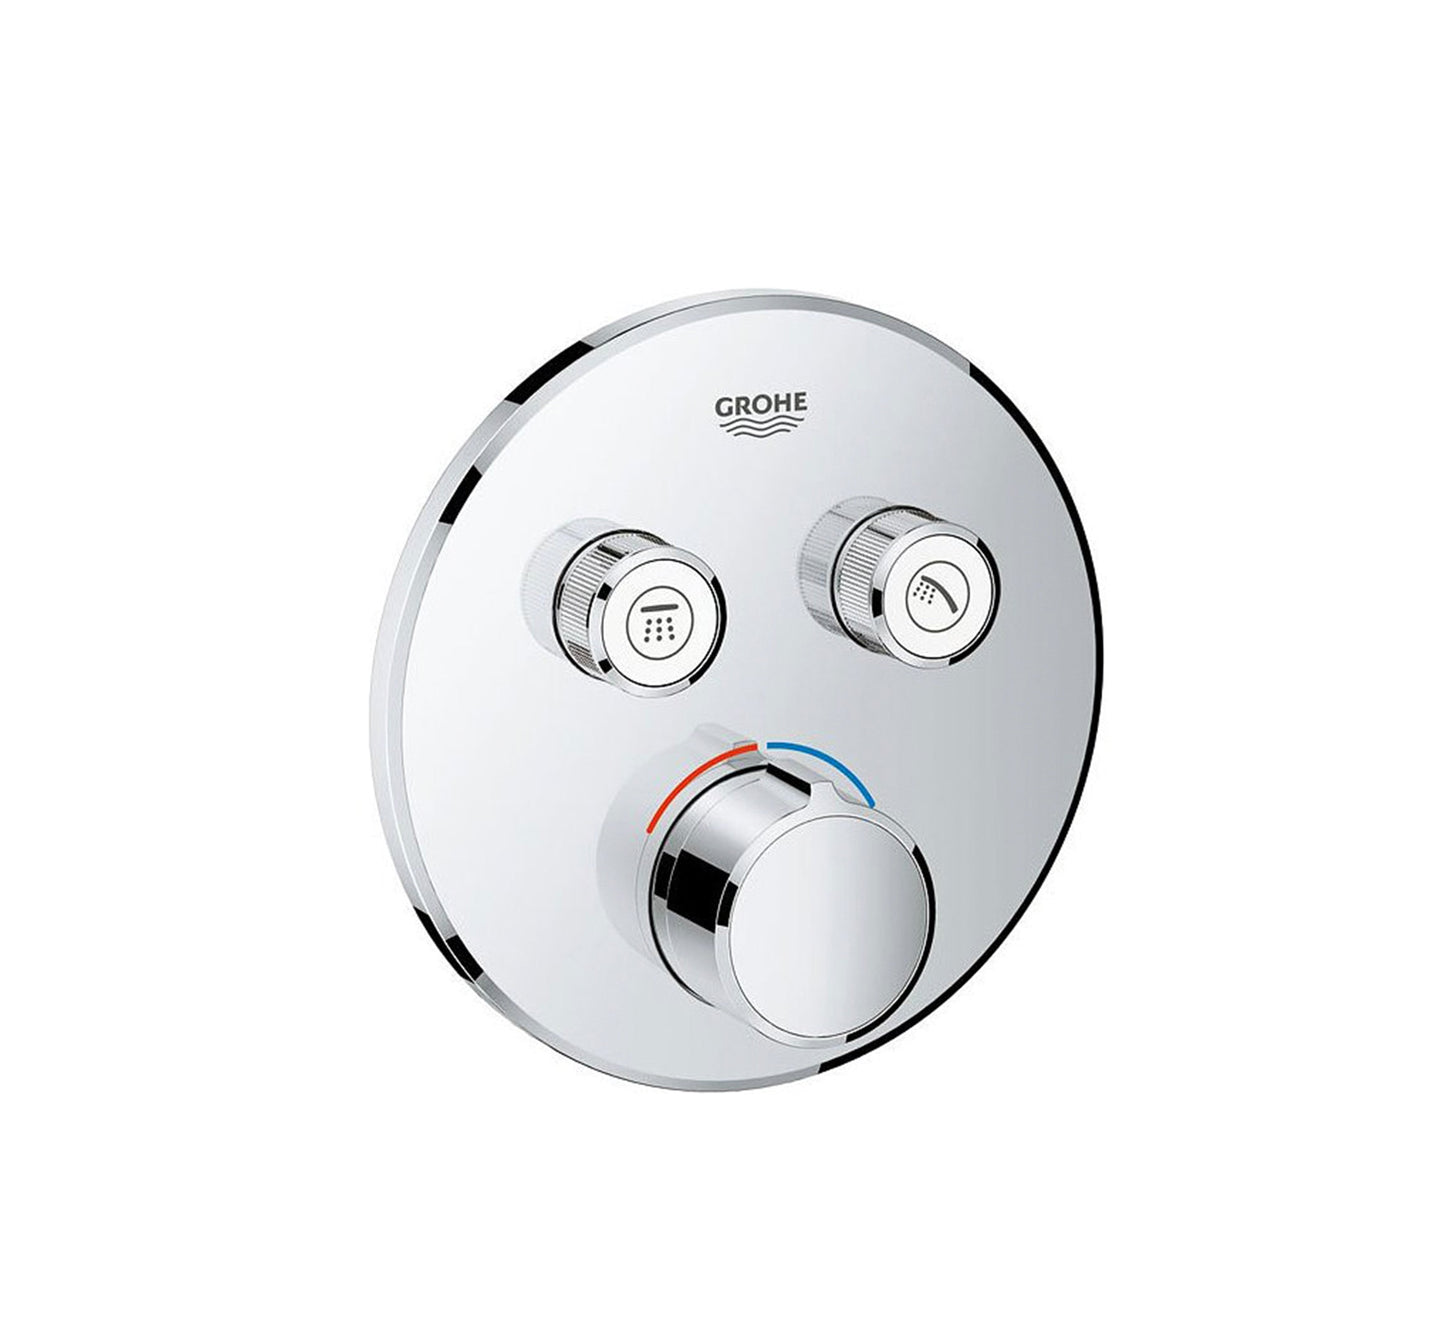 GROHE SMART CONTROL CONCEALED MIXER ROUND WITH ONE VALVE 2SC - 29145000